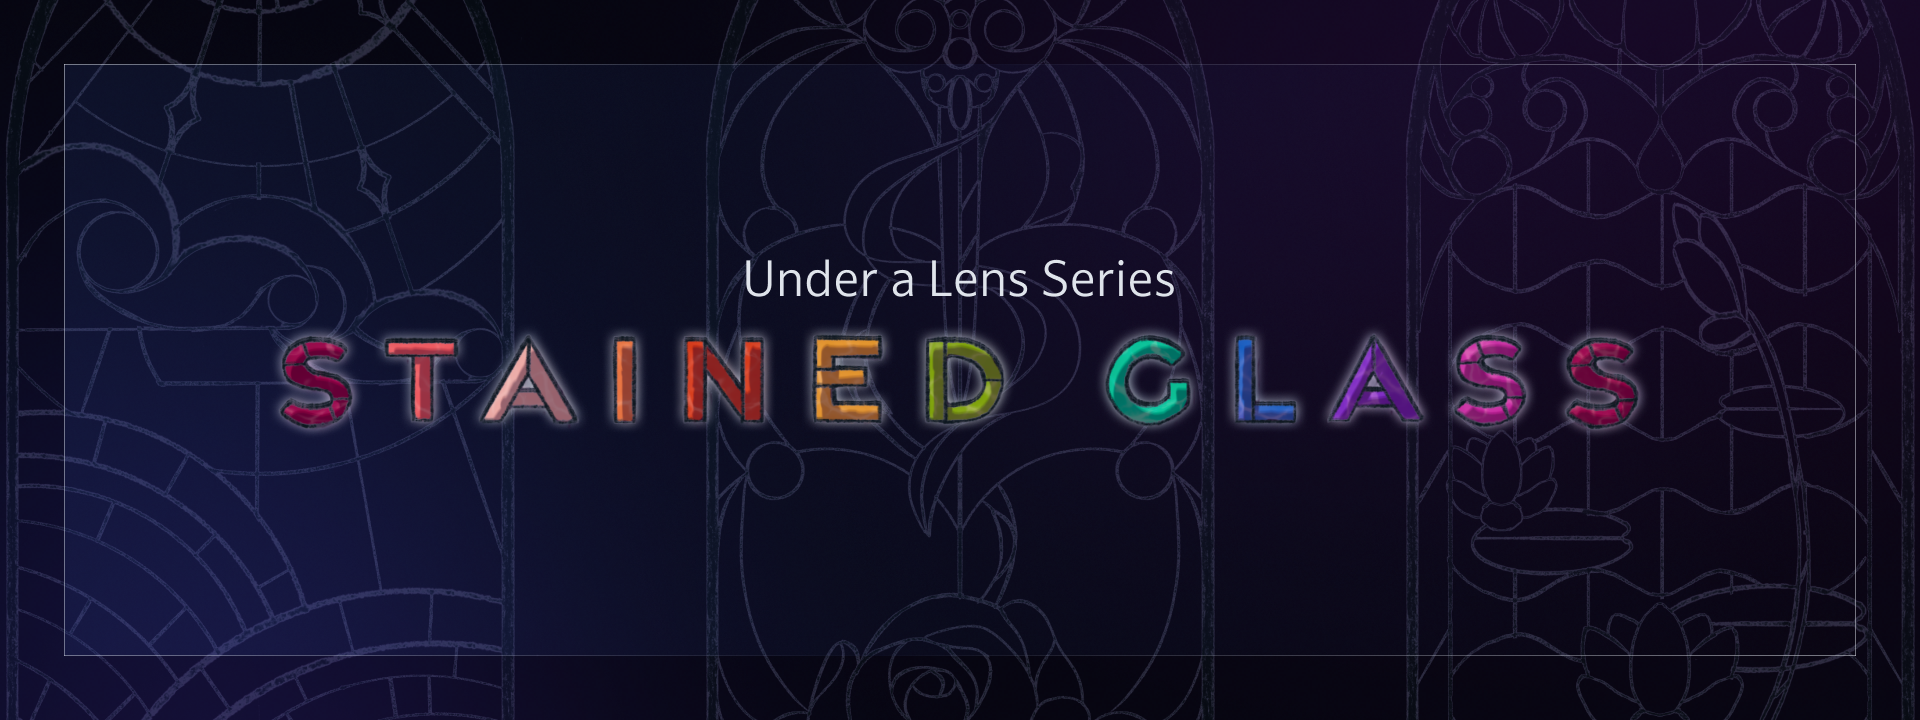 Under a Lens: Stained Glass